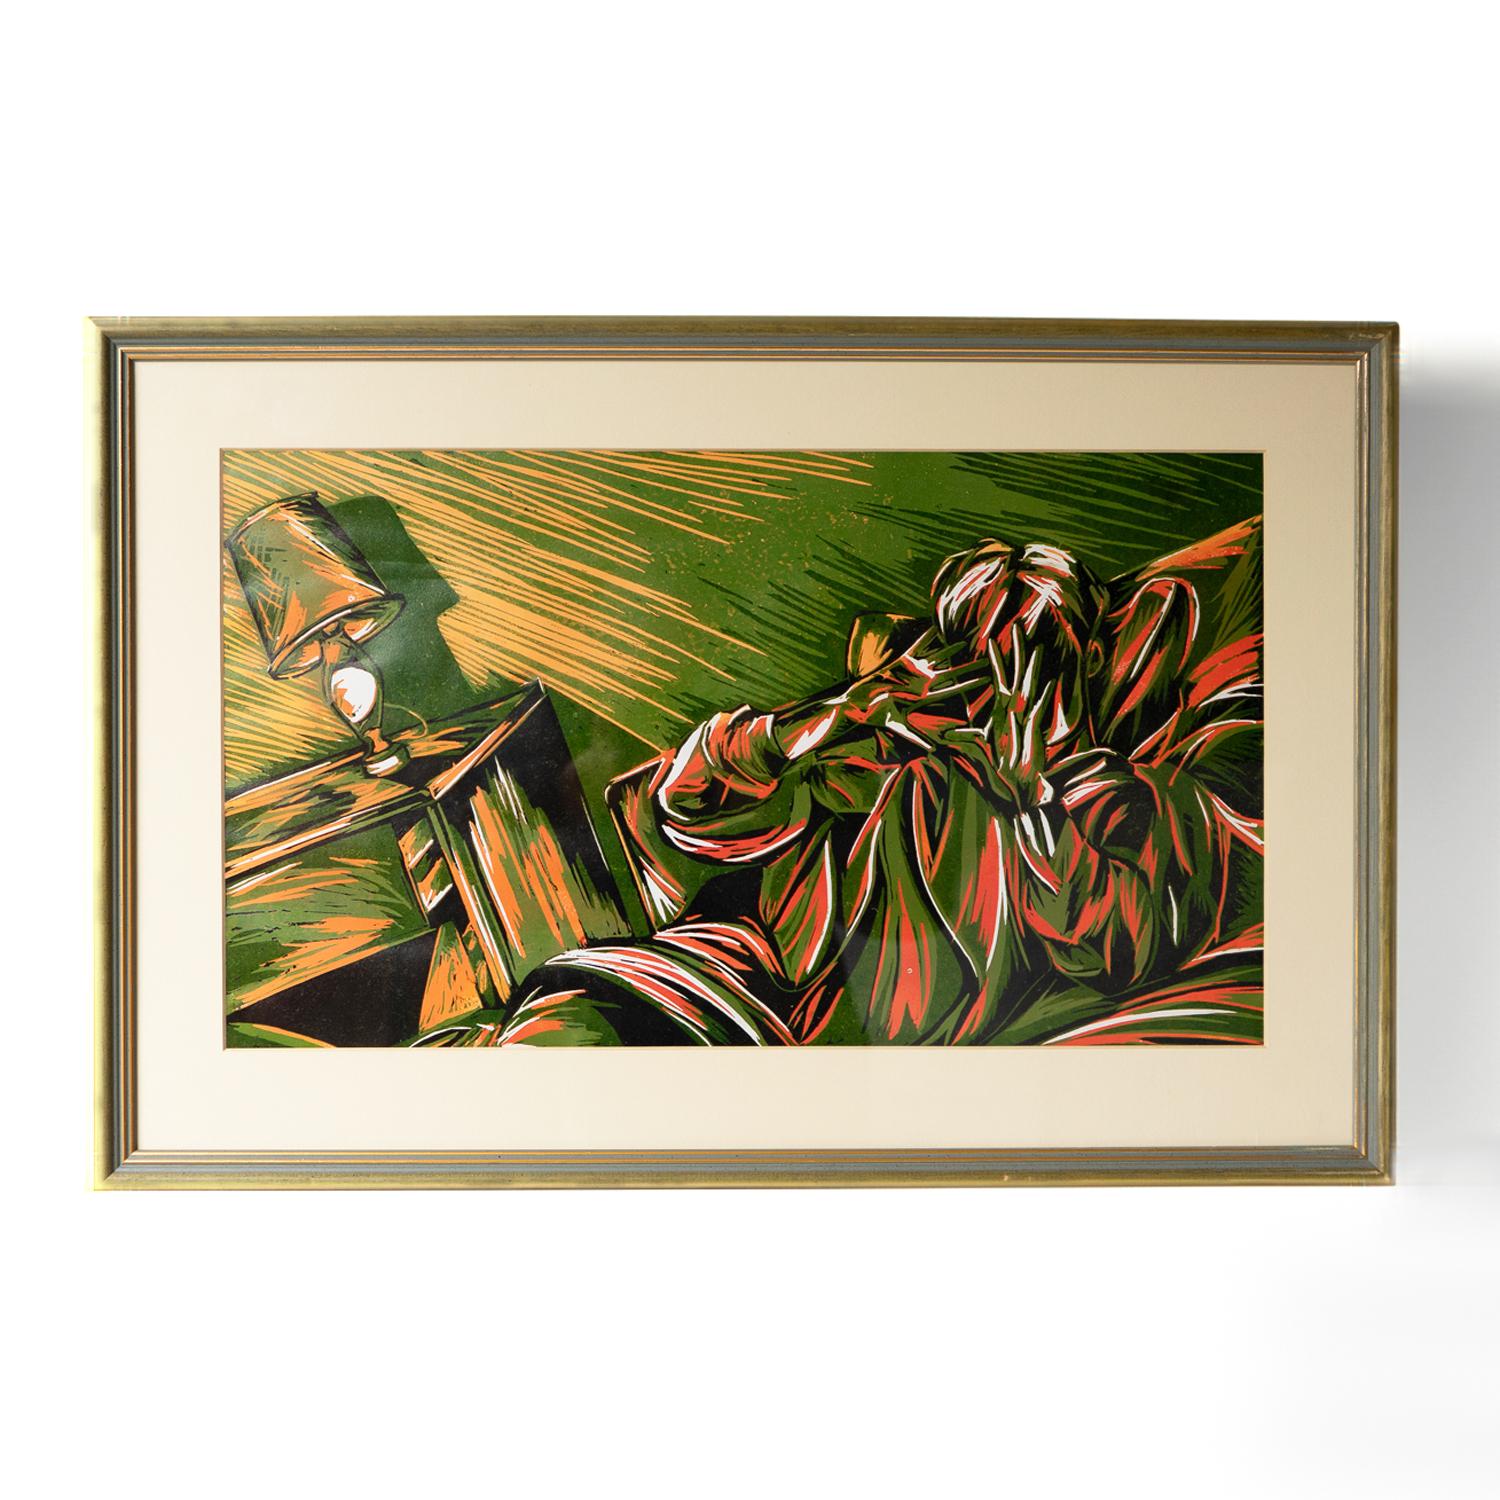 VINTAGE FRAMED PRINT
Depicting a man seated on the sofa with his hands covering his face.

The artist has skilfully captured the mood in the room with the tilted perspective and deep colour palette adding to the tension and leaving the viewer